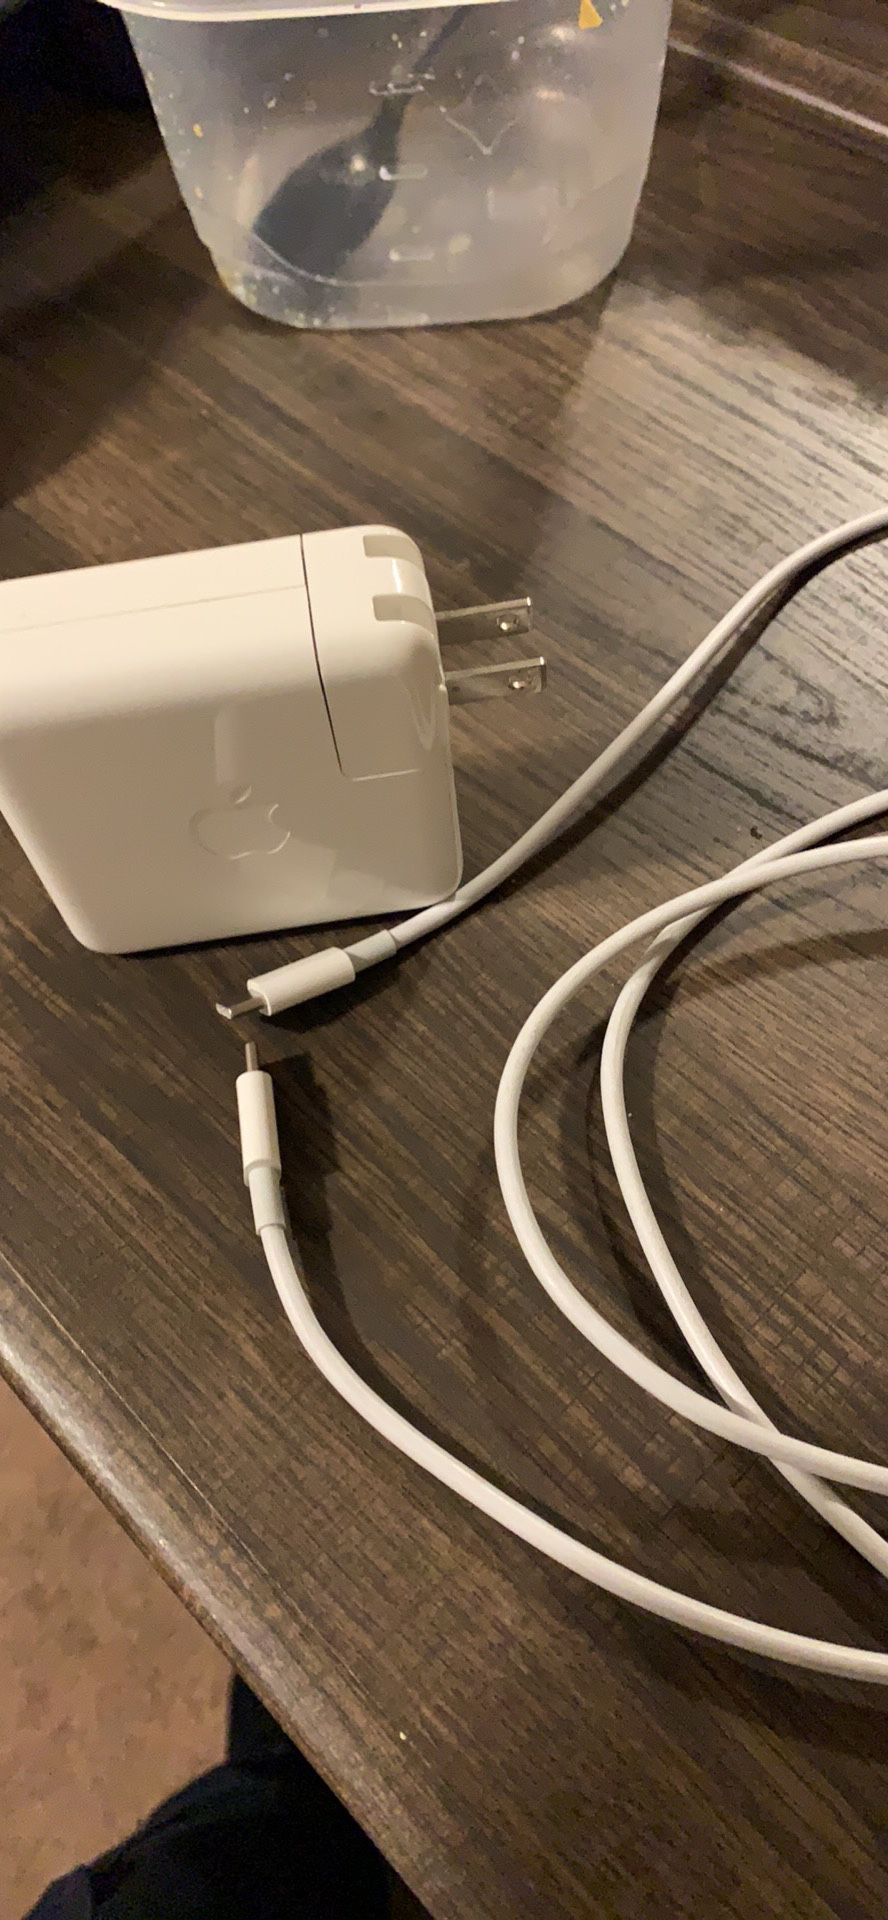 USB-c charger